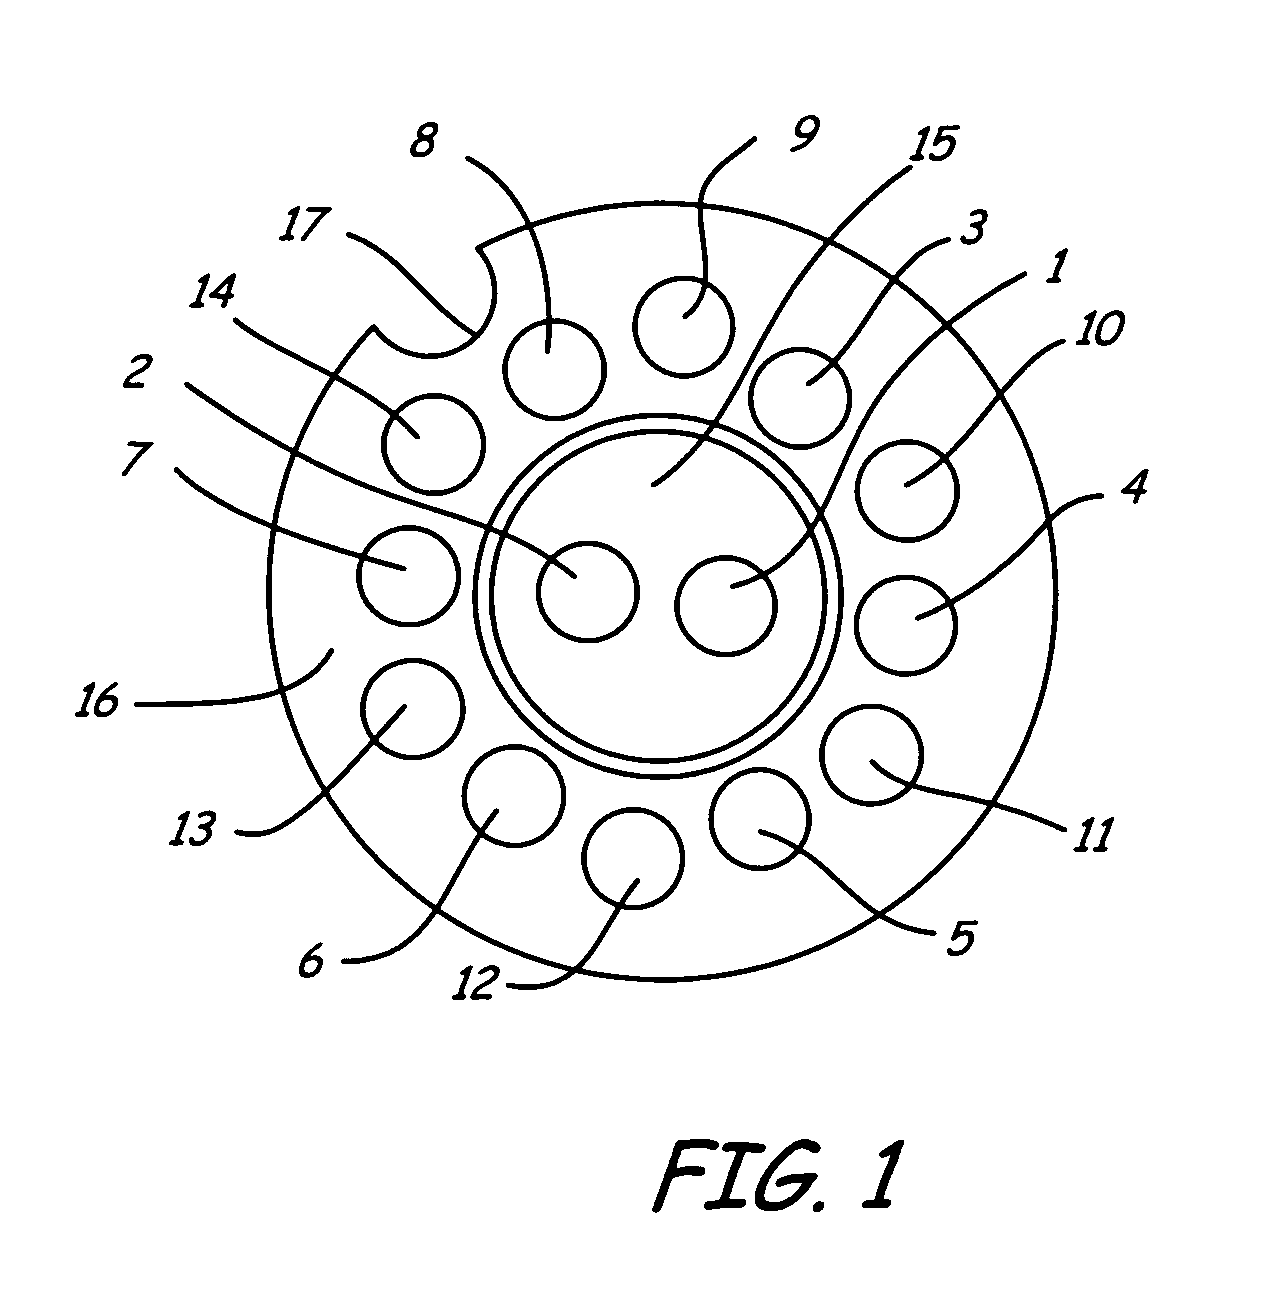 Heat dissipating pin structure for mitigation of LED temperature rise